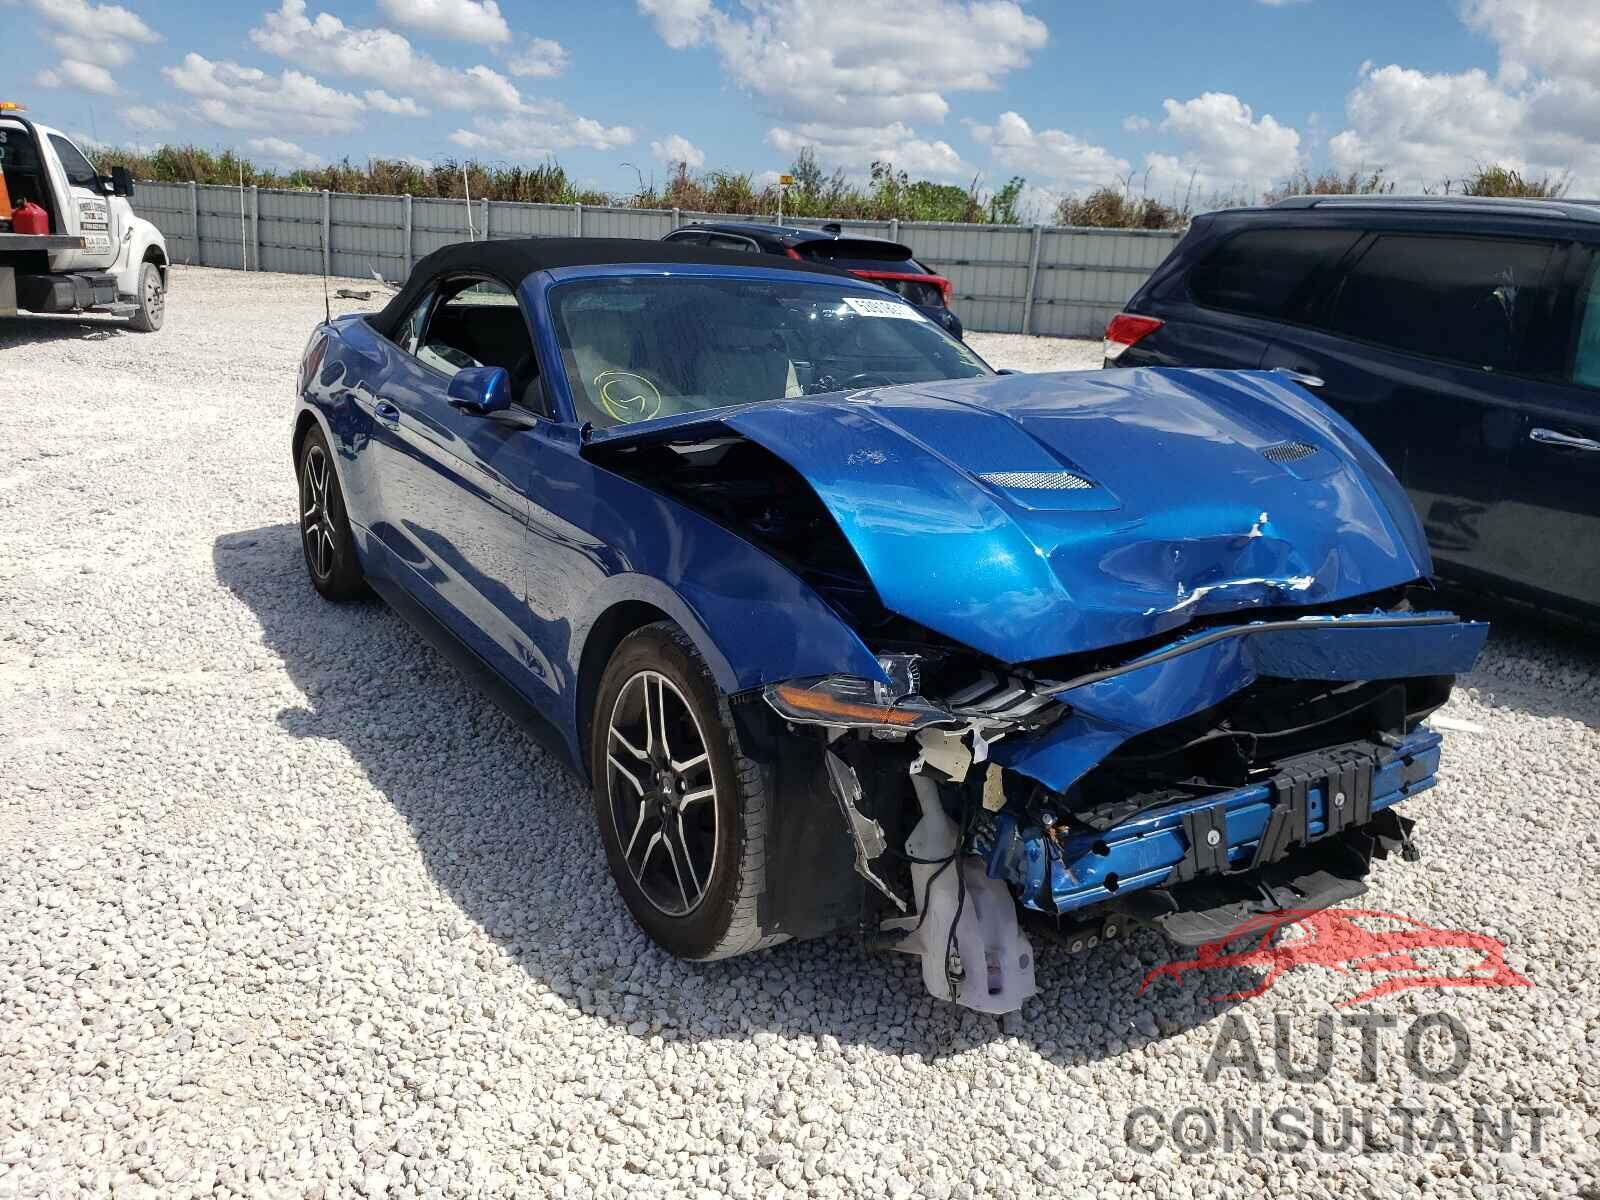 FORD MUSTANG 2018 - 1FATP8UH8J5119335